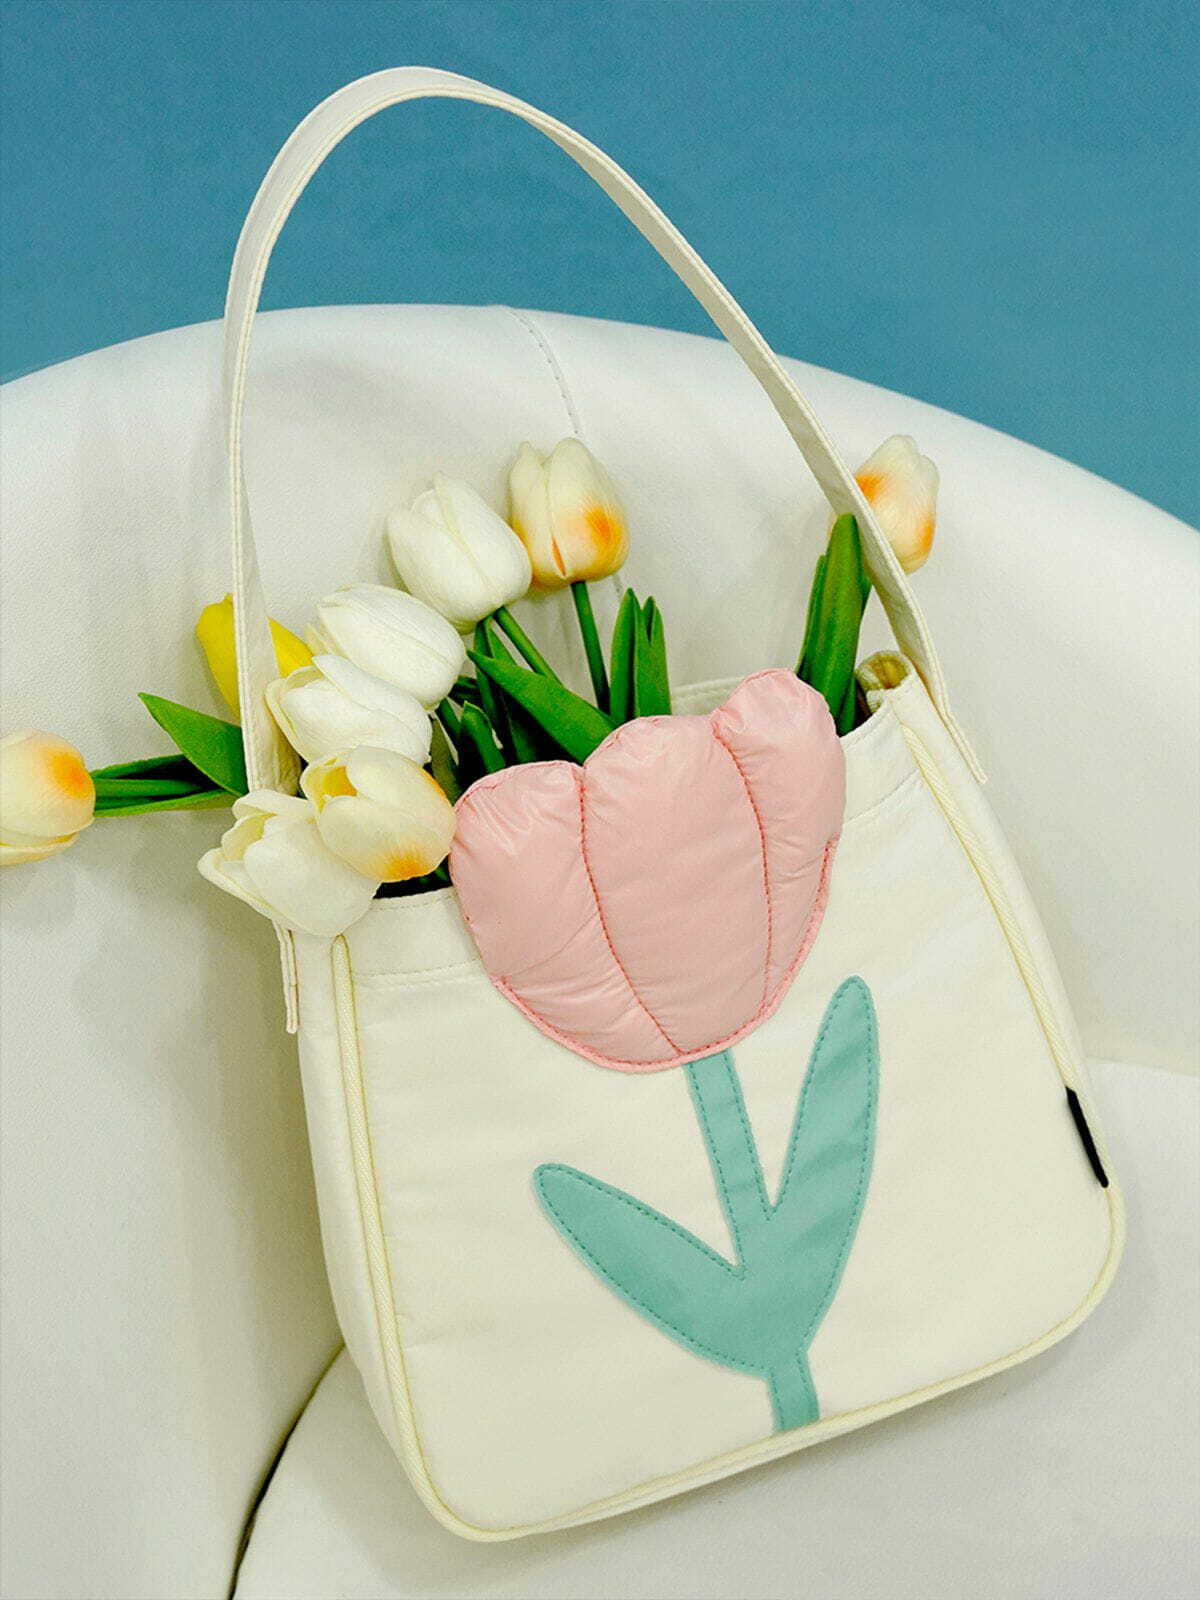 3d tulip flowers handbag   chic & crafted floral accessory 5824